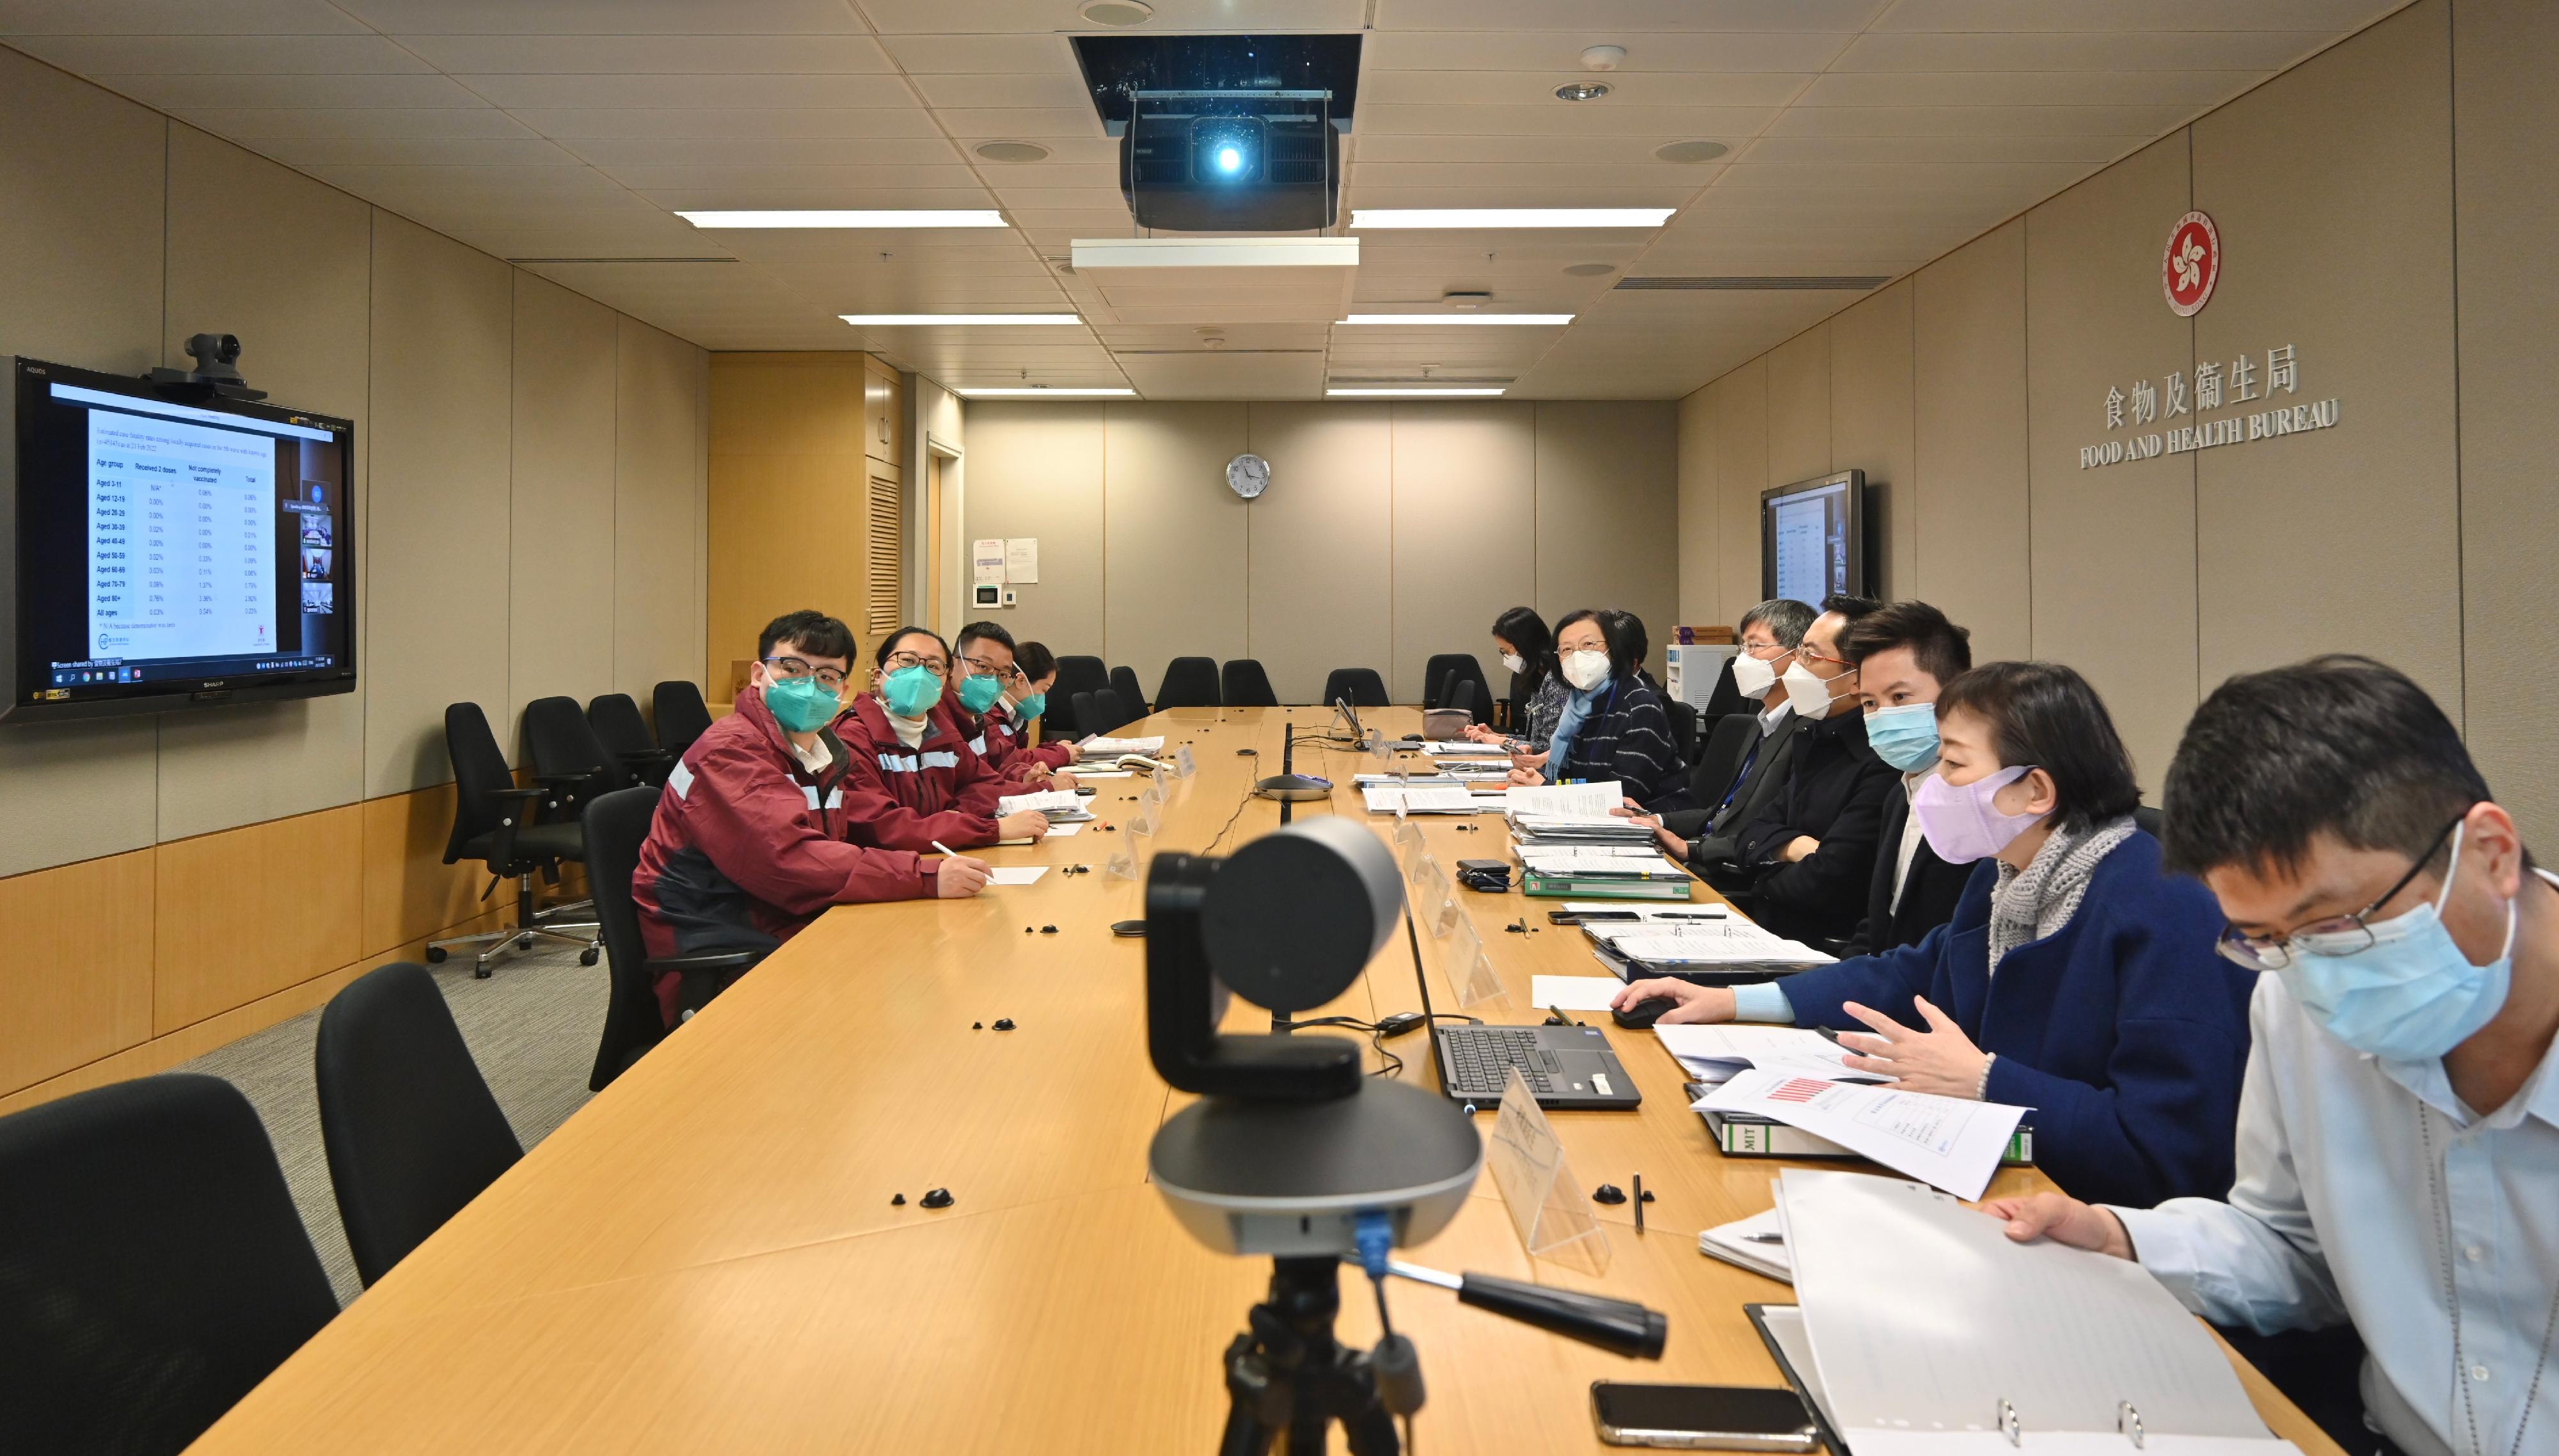 The Secretary for Food and Health, Professor Sophia Chan, joined by the Department of Health (DH) and the Hospital Authority (HA), had an anti-epidemic working meeting via video conferencing today (February 24) with the First-level Inspector of the Disease Prevention and Control Bureau, National Health Commission, Mr He Qinghua; the Mainland epidemiological expert delegation and the Mainland COVID-19 medical expert delegation staying in Hong Kong as well as other Mainland officials and experts. Photo shows Professor Chan (sixth right); the Permanent Secretary for Food and Health (Health), Mr Thomas Chan (fifth right); the Director of Health, Dr Ronald Lam (fourth right); the Controller of the Centre for Health Protection (CHP) of the DH, Dr Edwin Tsui (third right); the Head of the Communicable Disease Branch of the CHP of the DH, Dr Chuang Shuk-kwan (second right); the Assistant Director of Health (Port Health and Quarantine), Dr Leung Yiu-hong (first right); the Director of Institute of Infectious Disease Control and Prevention of the Guangdong Provincial Center for Disease Control and Prevention, Mr Kang Min (third left); senior public health doctor of the Guangzhou Center for Disease Control and Prevention, Ms Chen Chun (second left); the Director of Public Health Emergency Management Department of Zhongshan Center for Disease Control and Prevention, Ms Chen Xueqin (fourth left); and General Office clerk of the Guangdong Provincial Center for Disease Control and Prevention Mr Yang Taohui (first left) in the meeting.